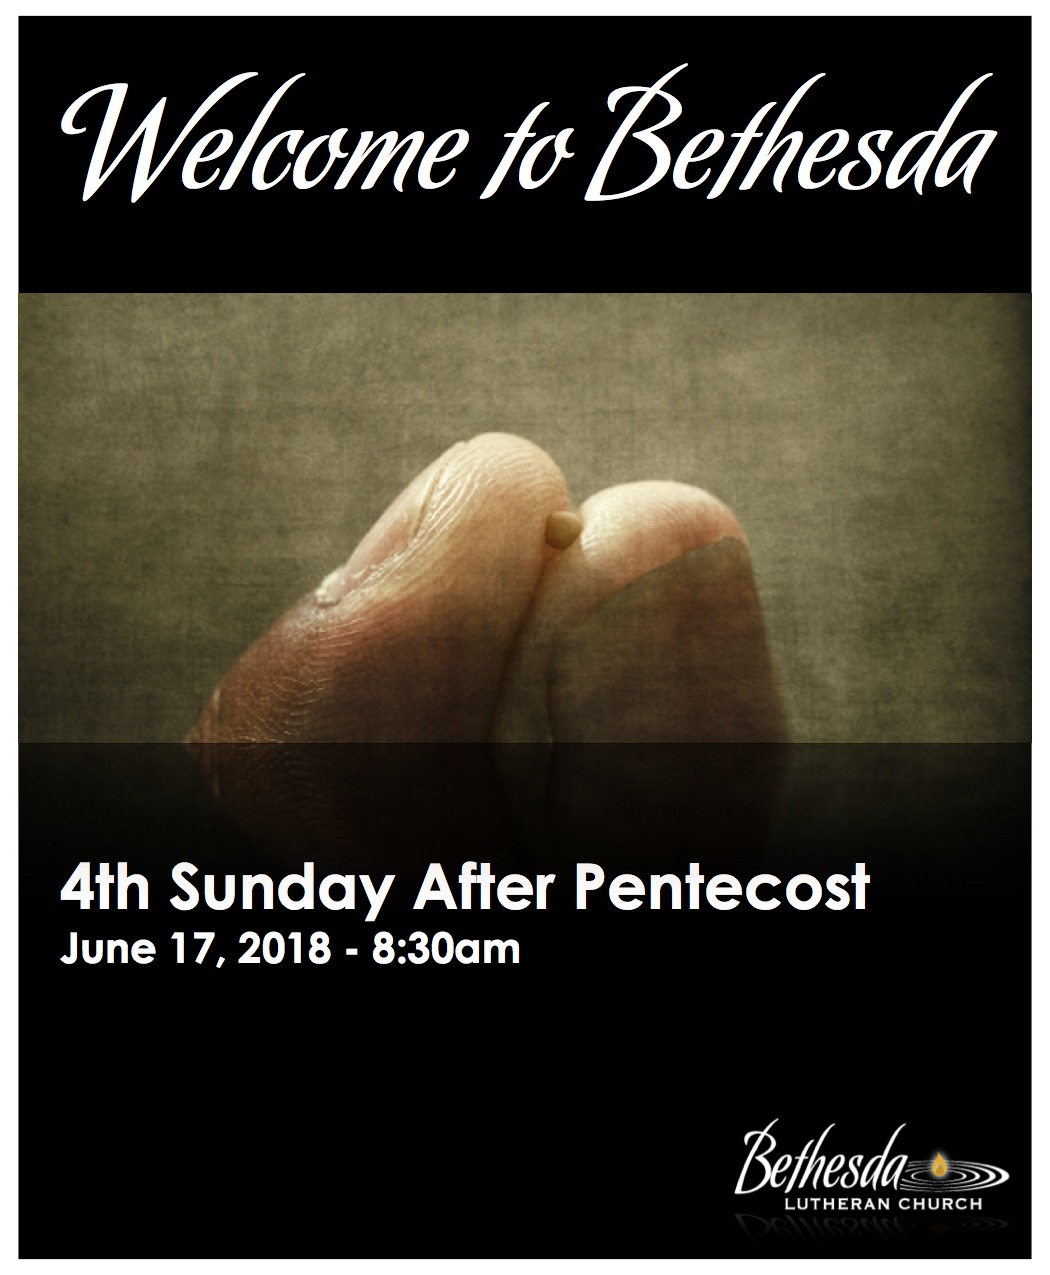 The 4th Sunday after Pentecost 